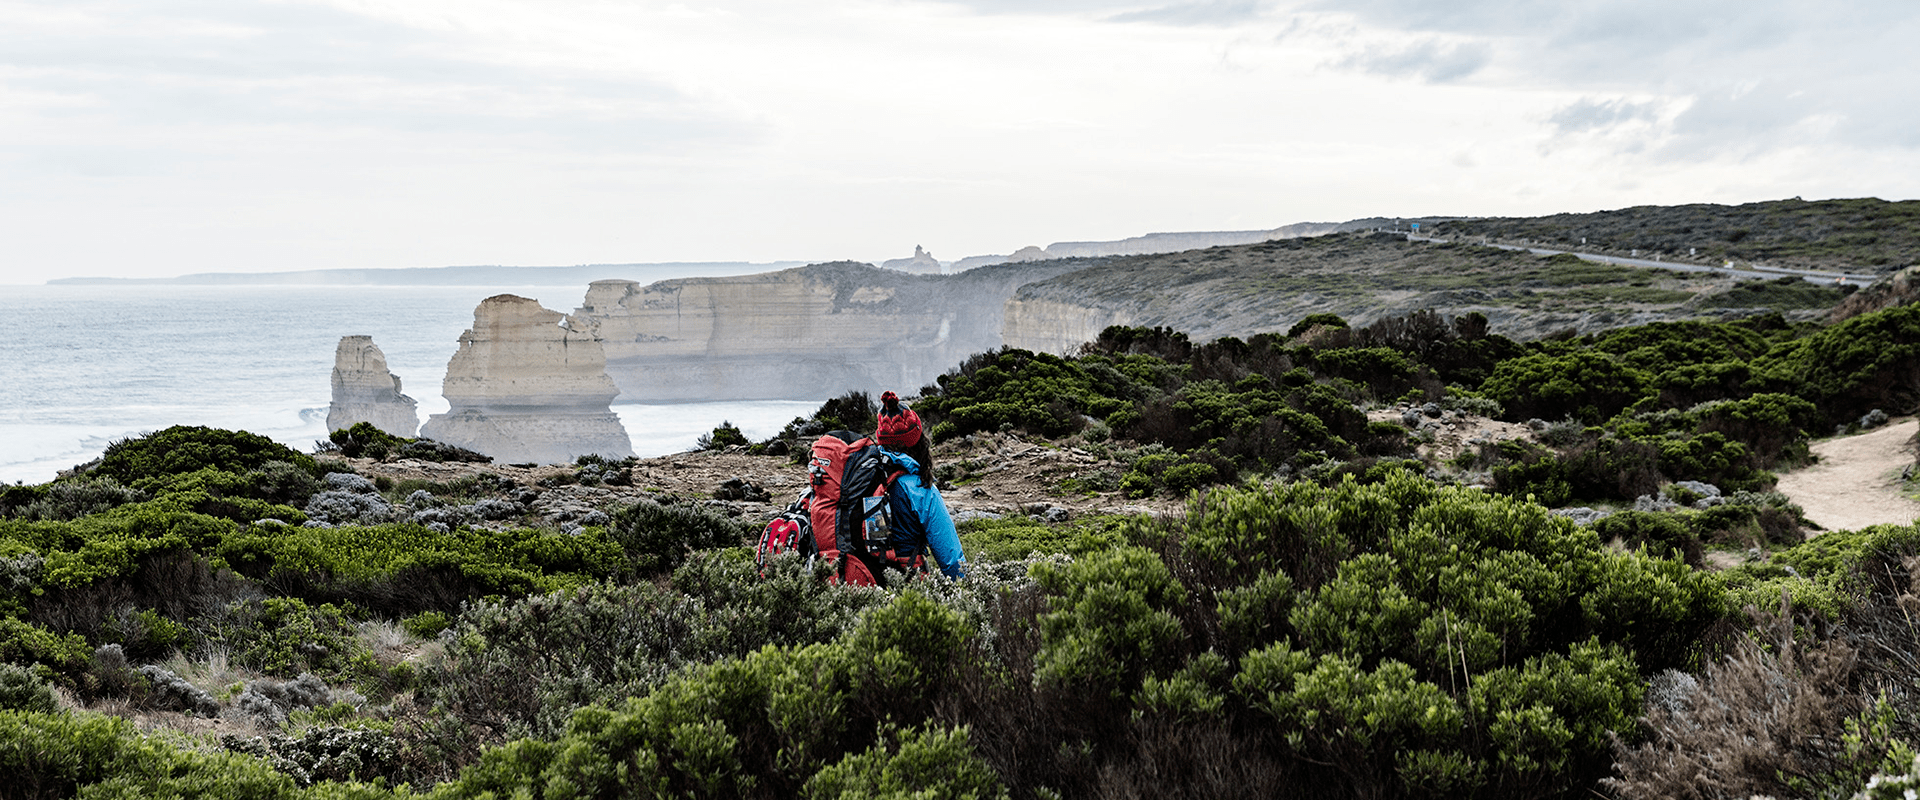 Two hikers walk through coastal shrubbery along a hiking trail with the Twelve Apostles appearing in the background with ocean mist making it's way up steep ocean cliffs.